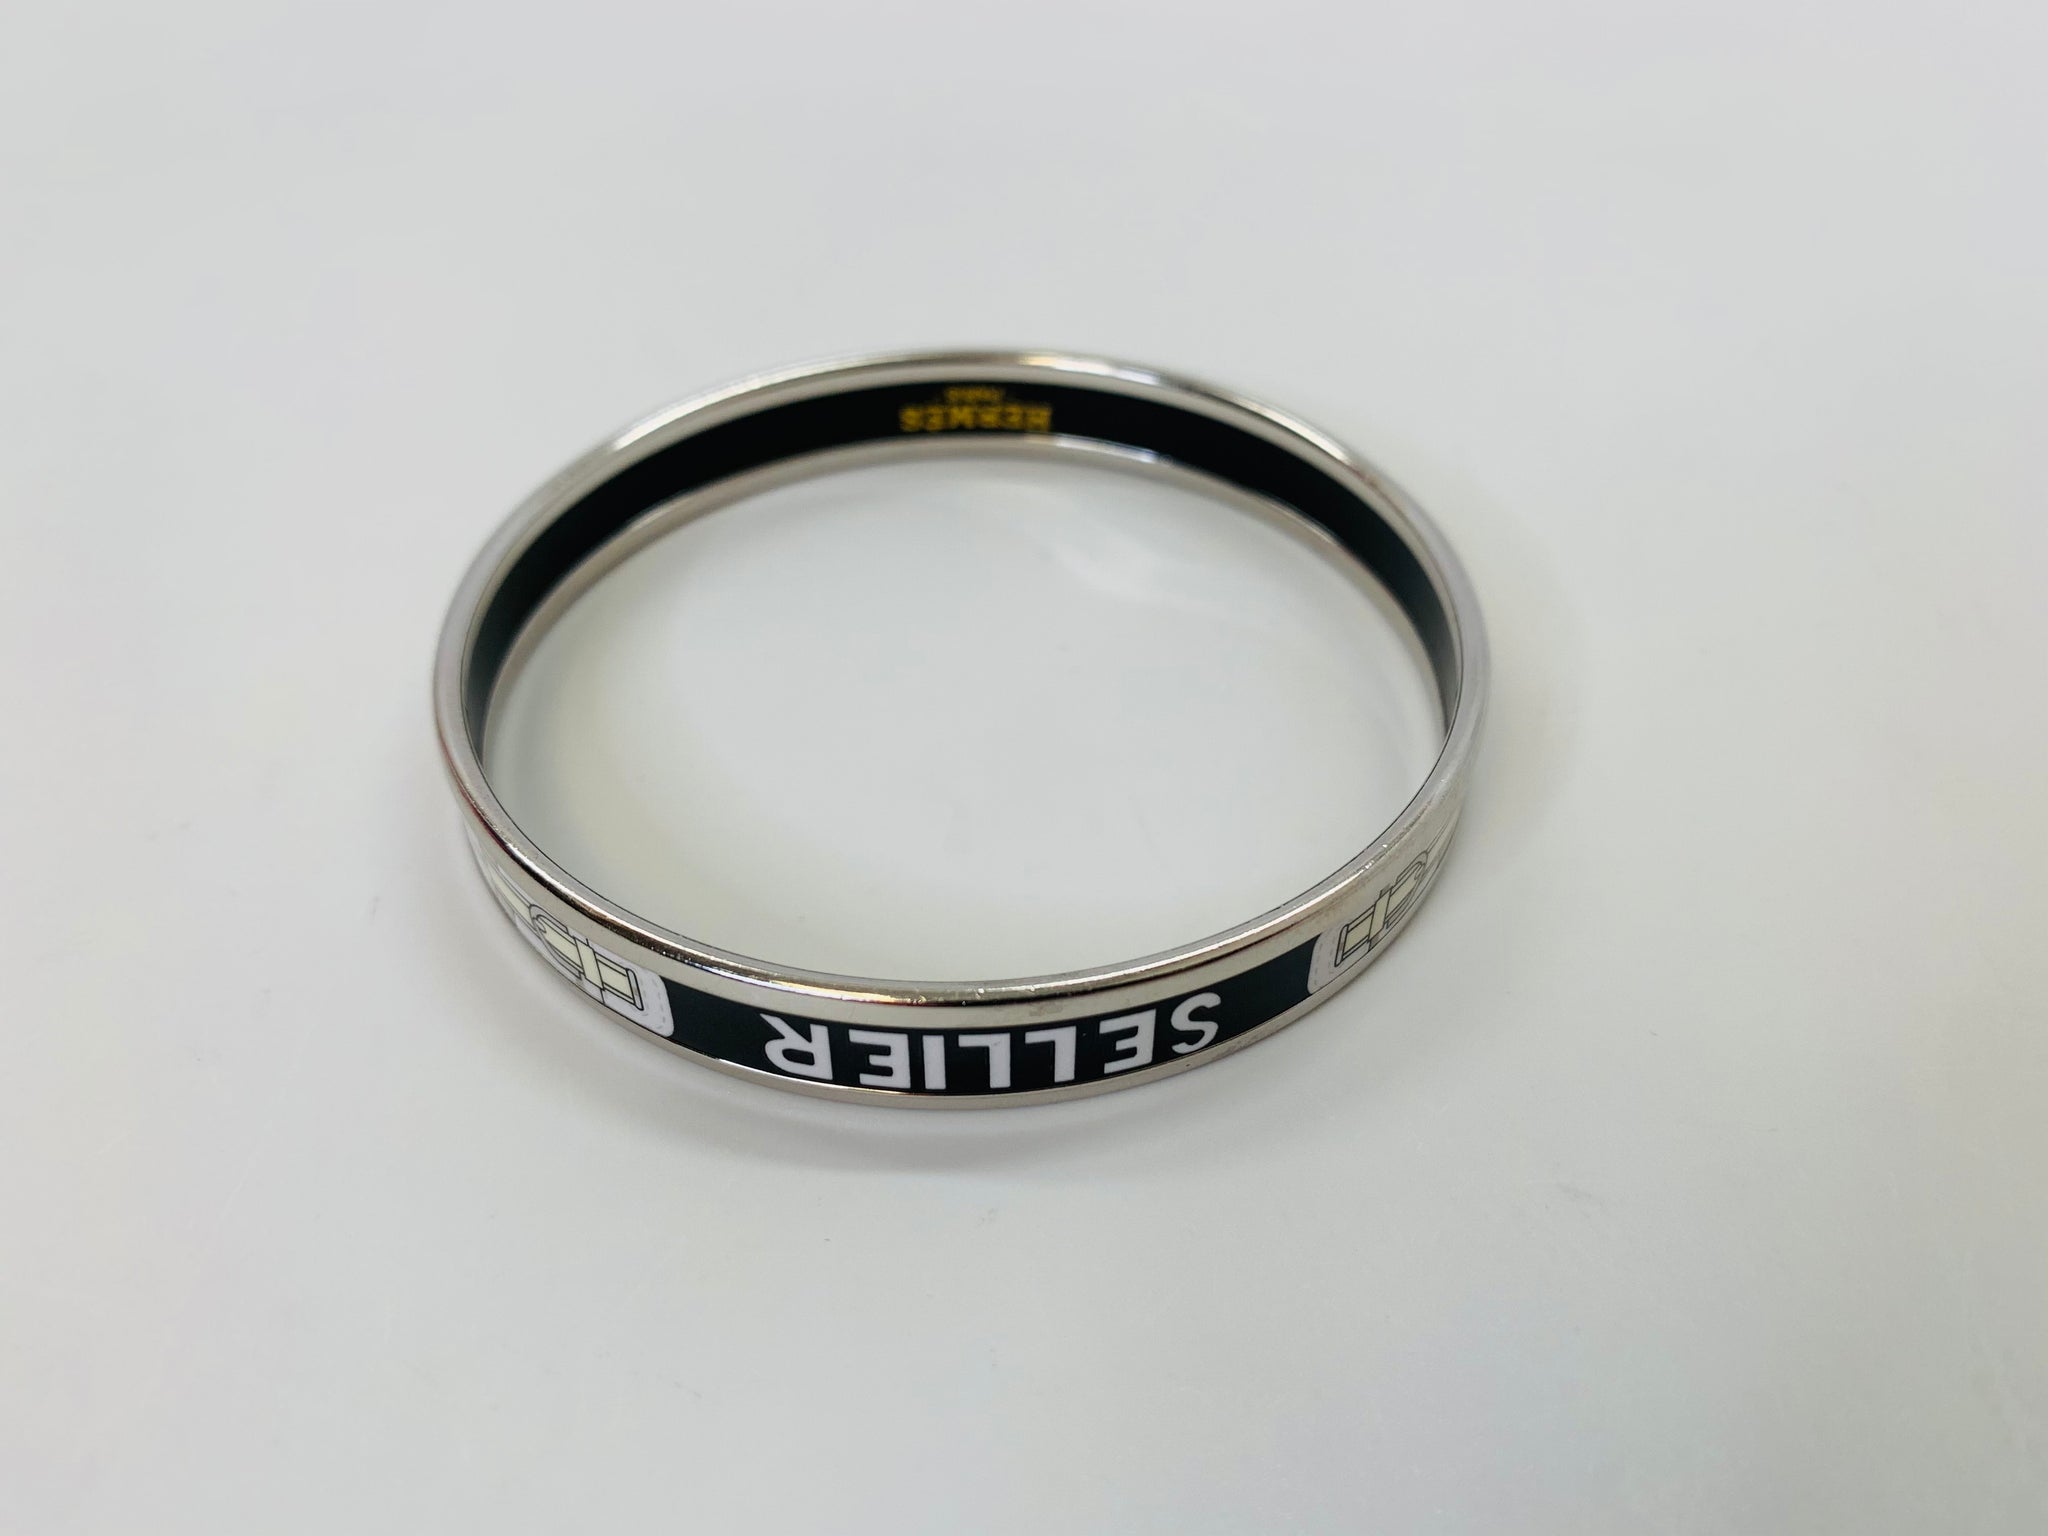 Hermes Wide Enamel Bangle (Grands Fonds) - Size 62 | Rent Hermes jewelry  for $55/month